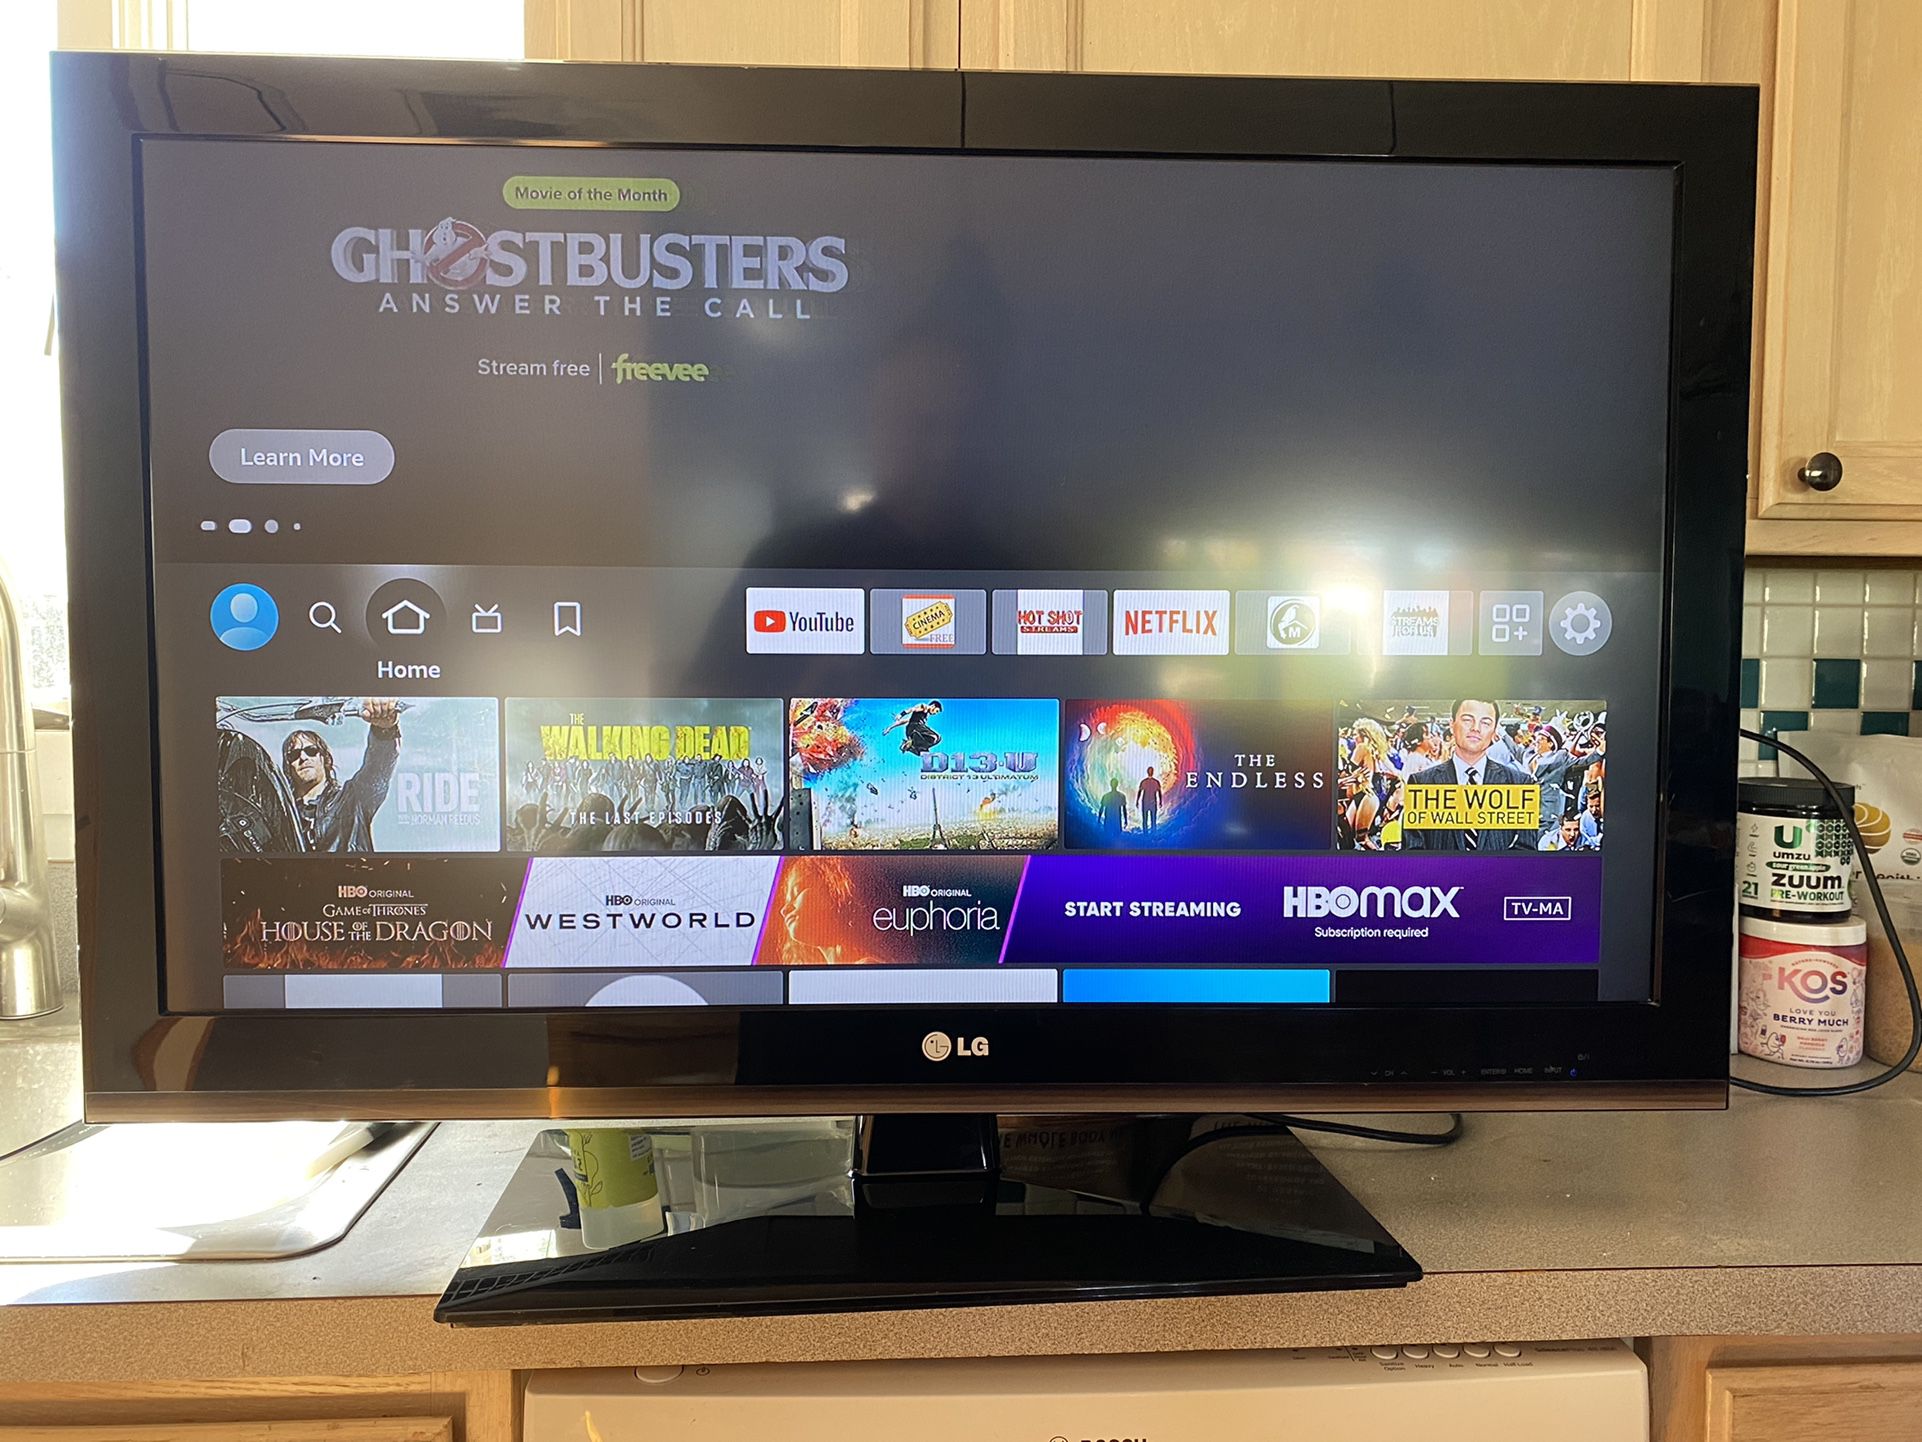 LG 37 inch 1080 P LCD TV with a remote